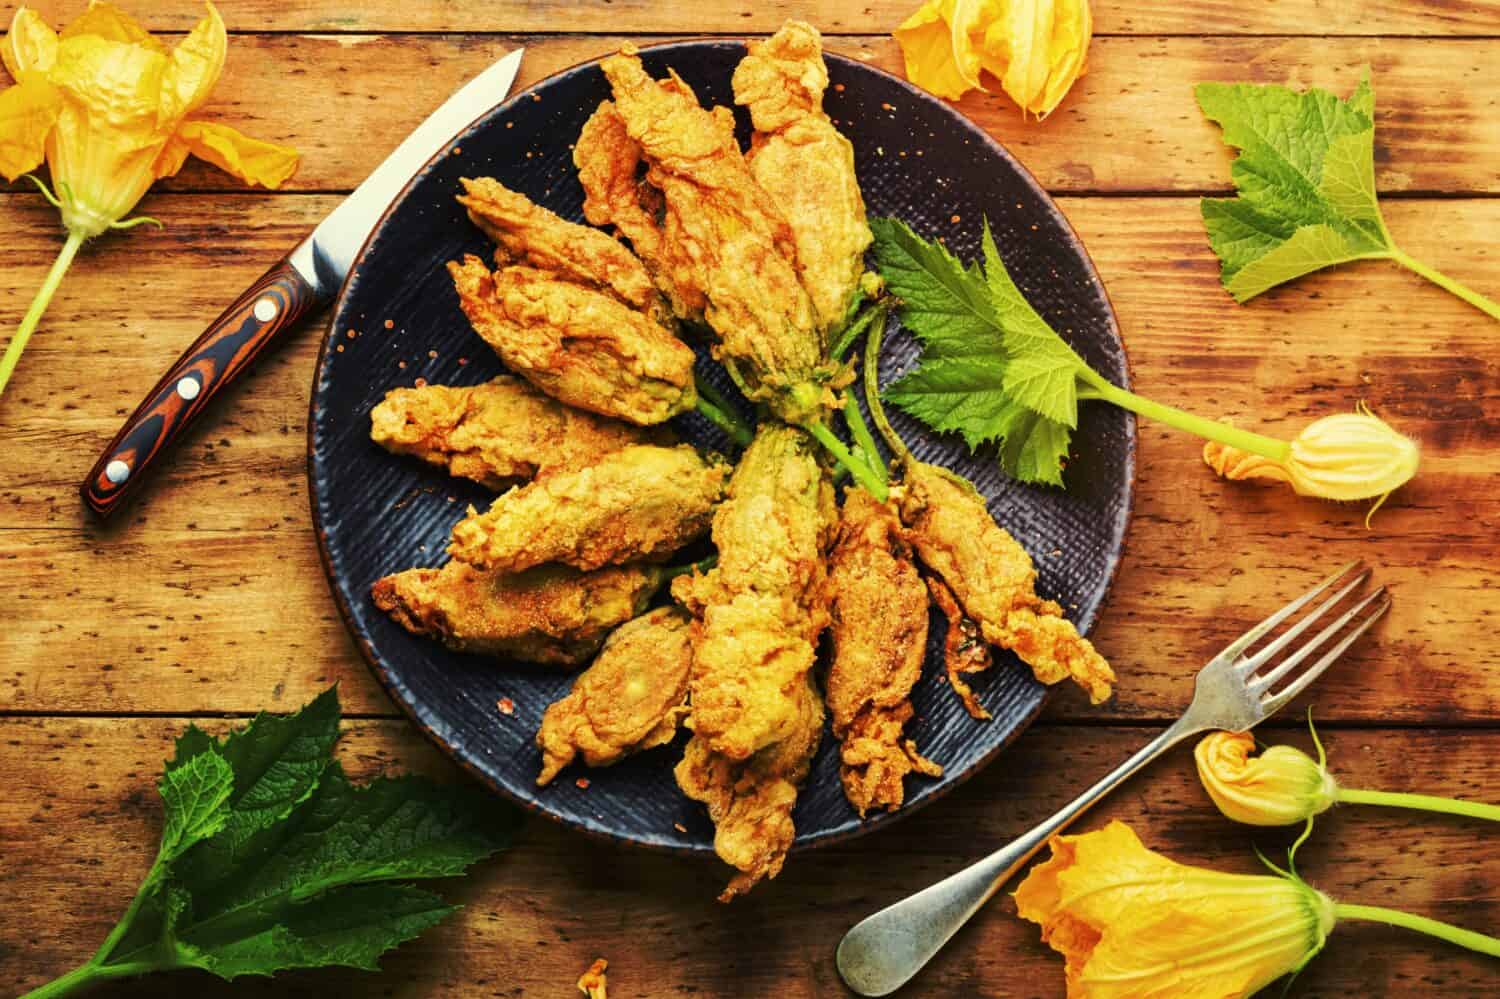 Fried zucchini flowers stuffed cottage cheese.Roasted courgette flowers.Healthy food,stuffed squash blossoms